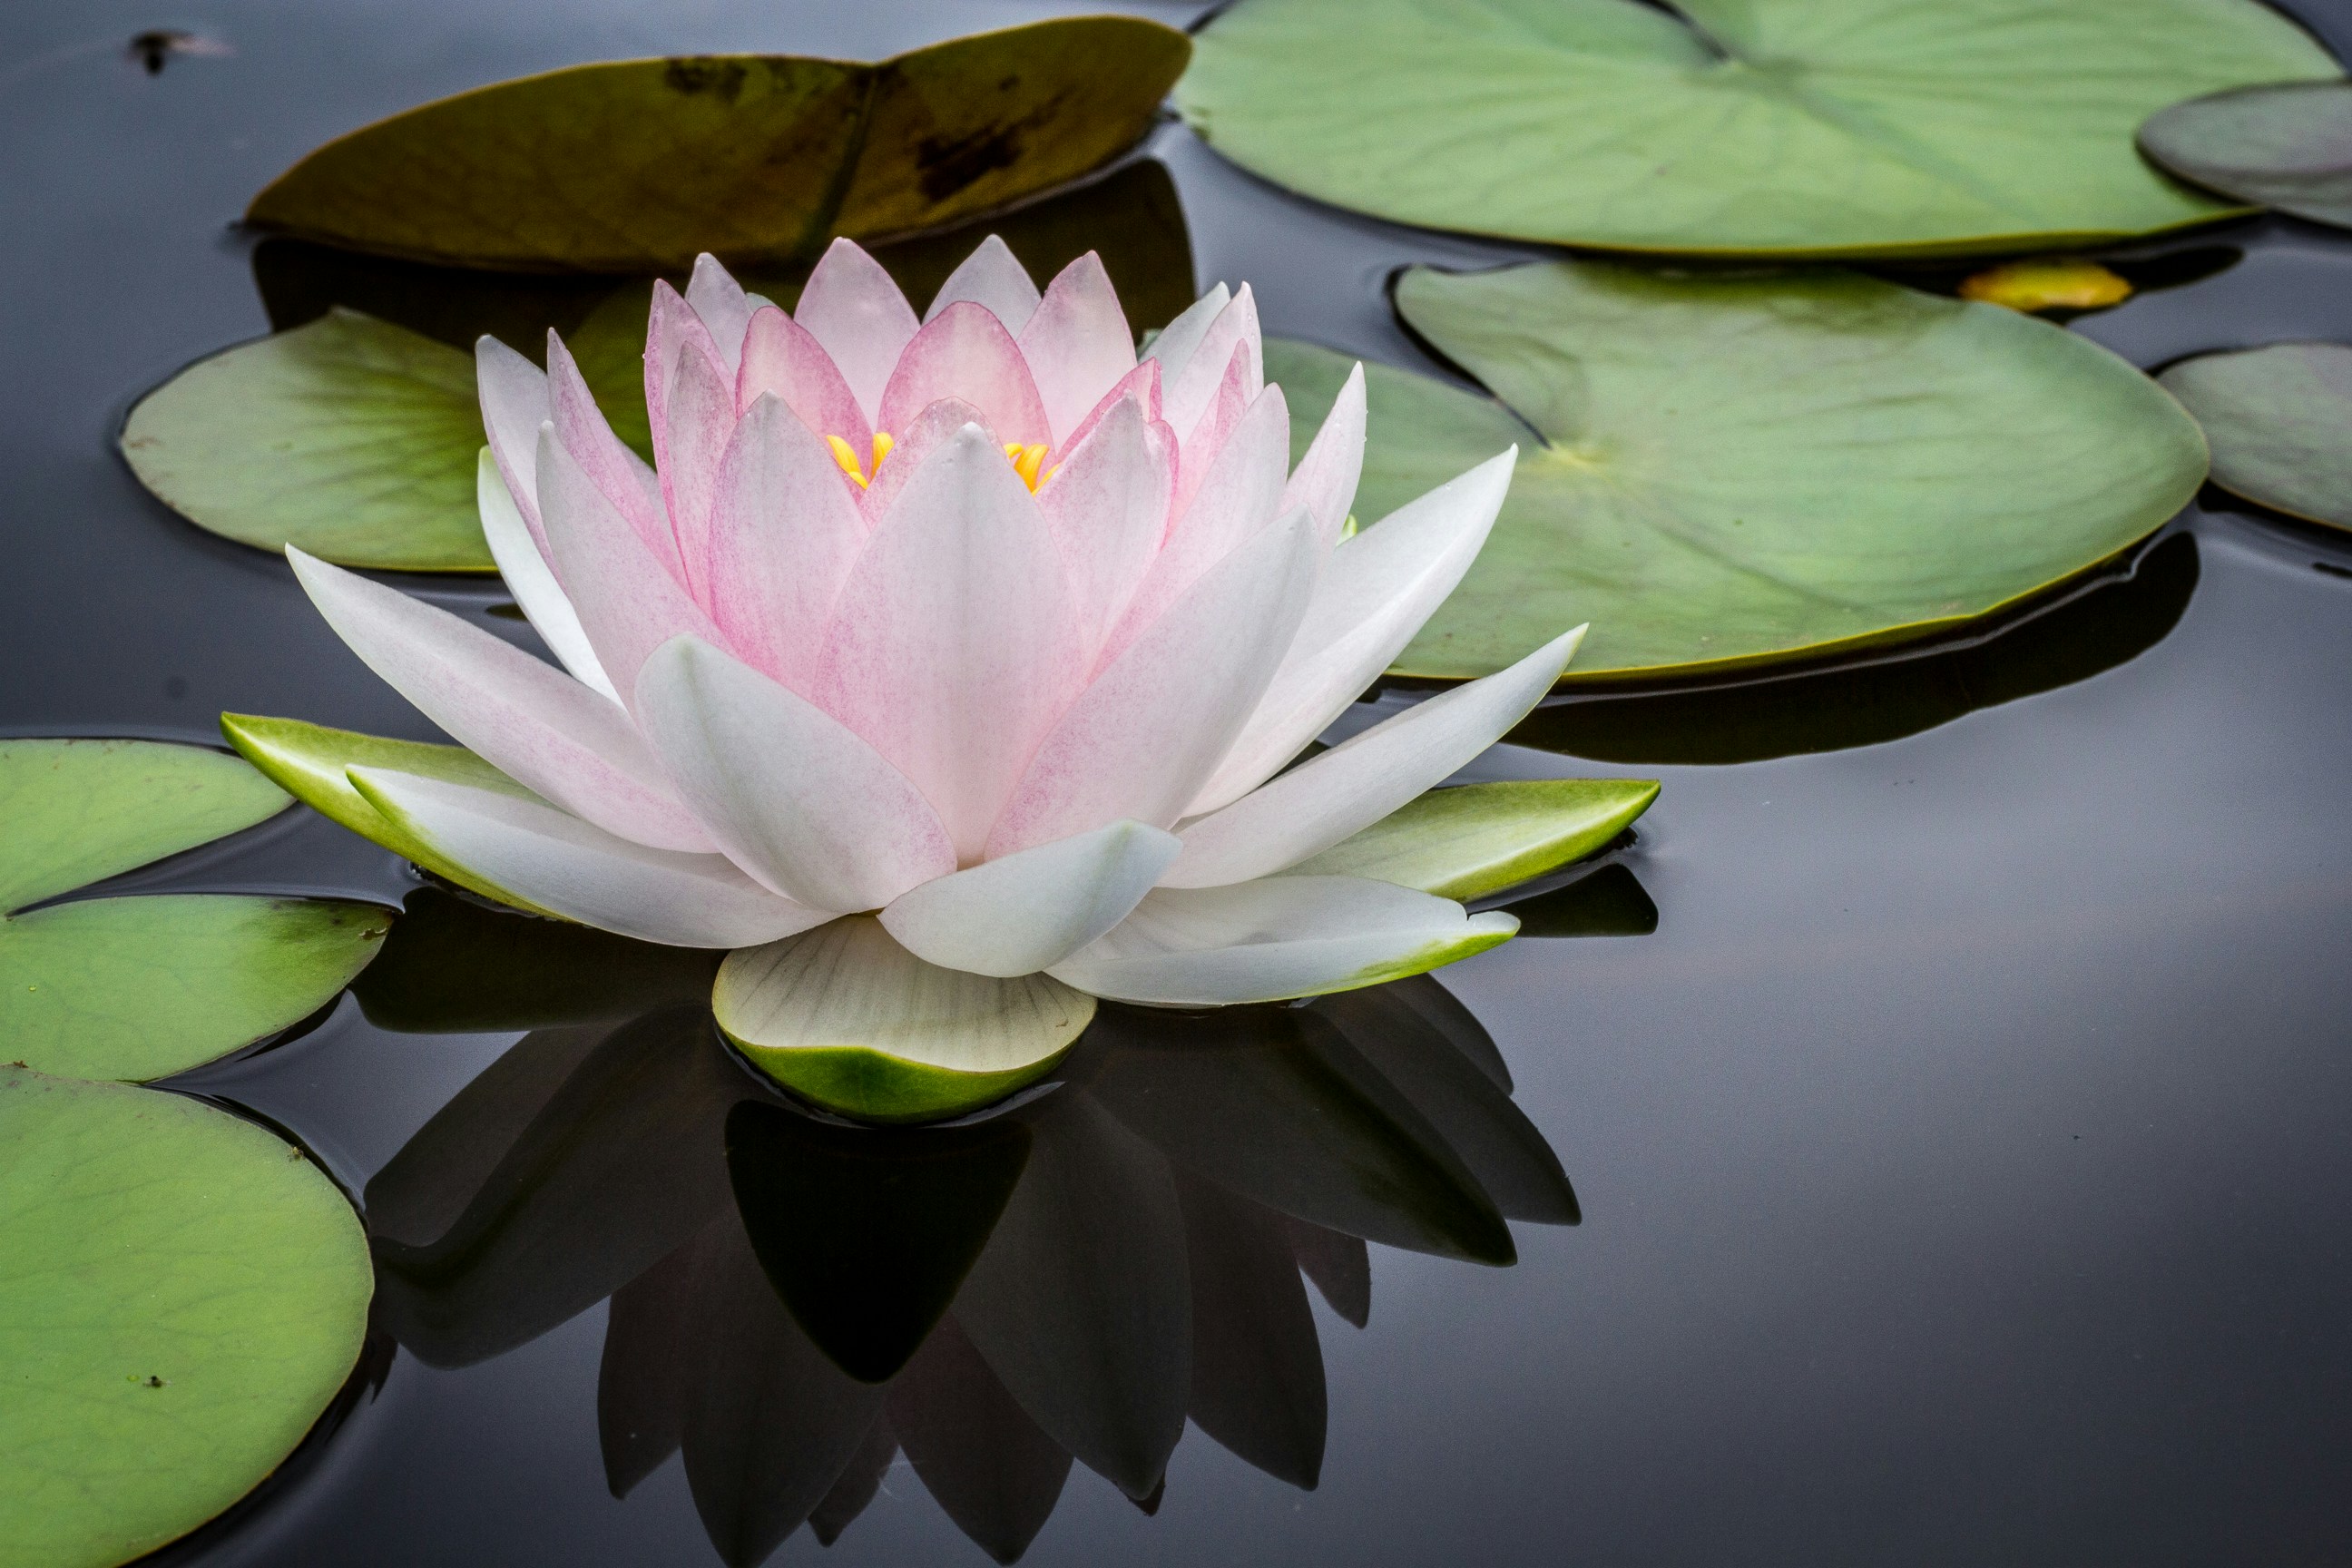 Delicate pink lotus blossom floating with green lilly pads on a dark pond